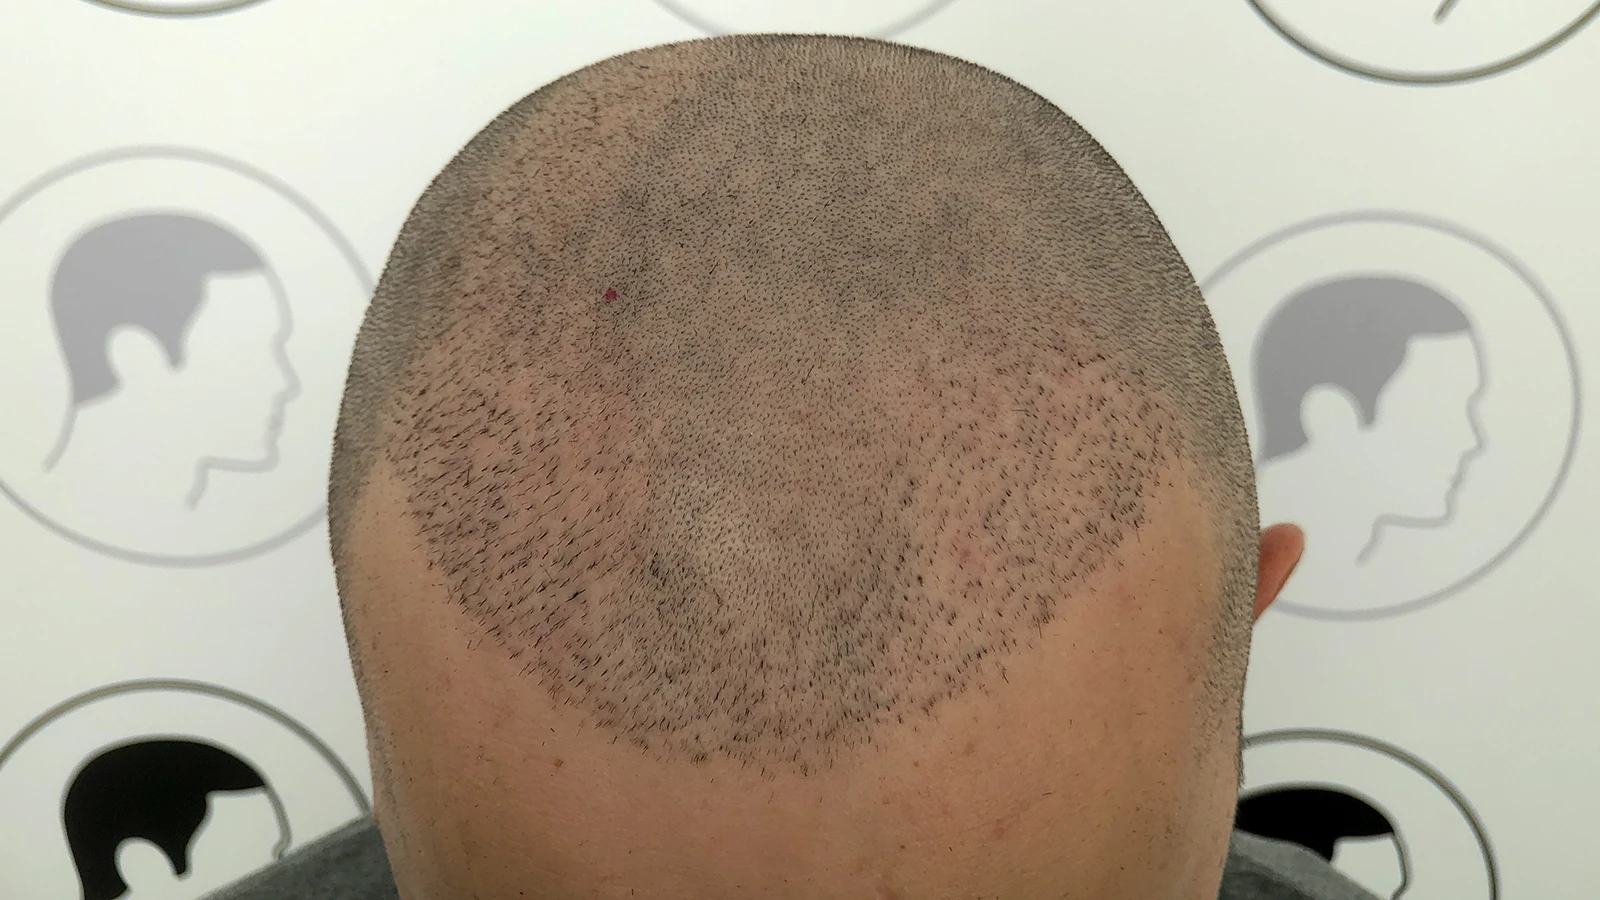 FUE Hair transplant - what to expect and alternatives